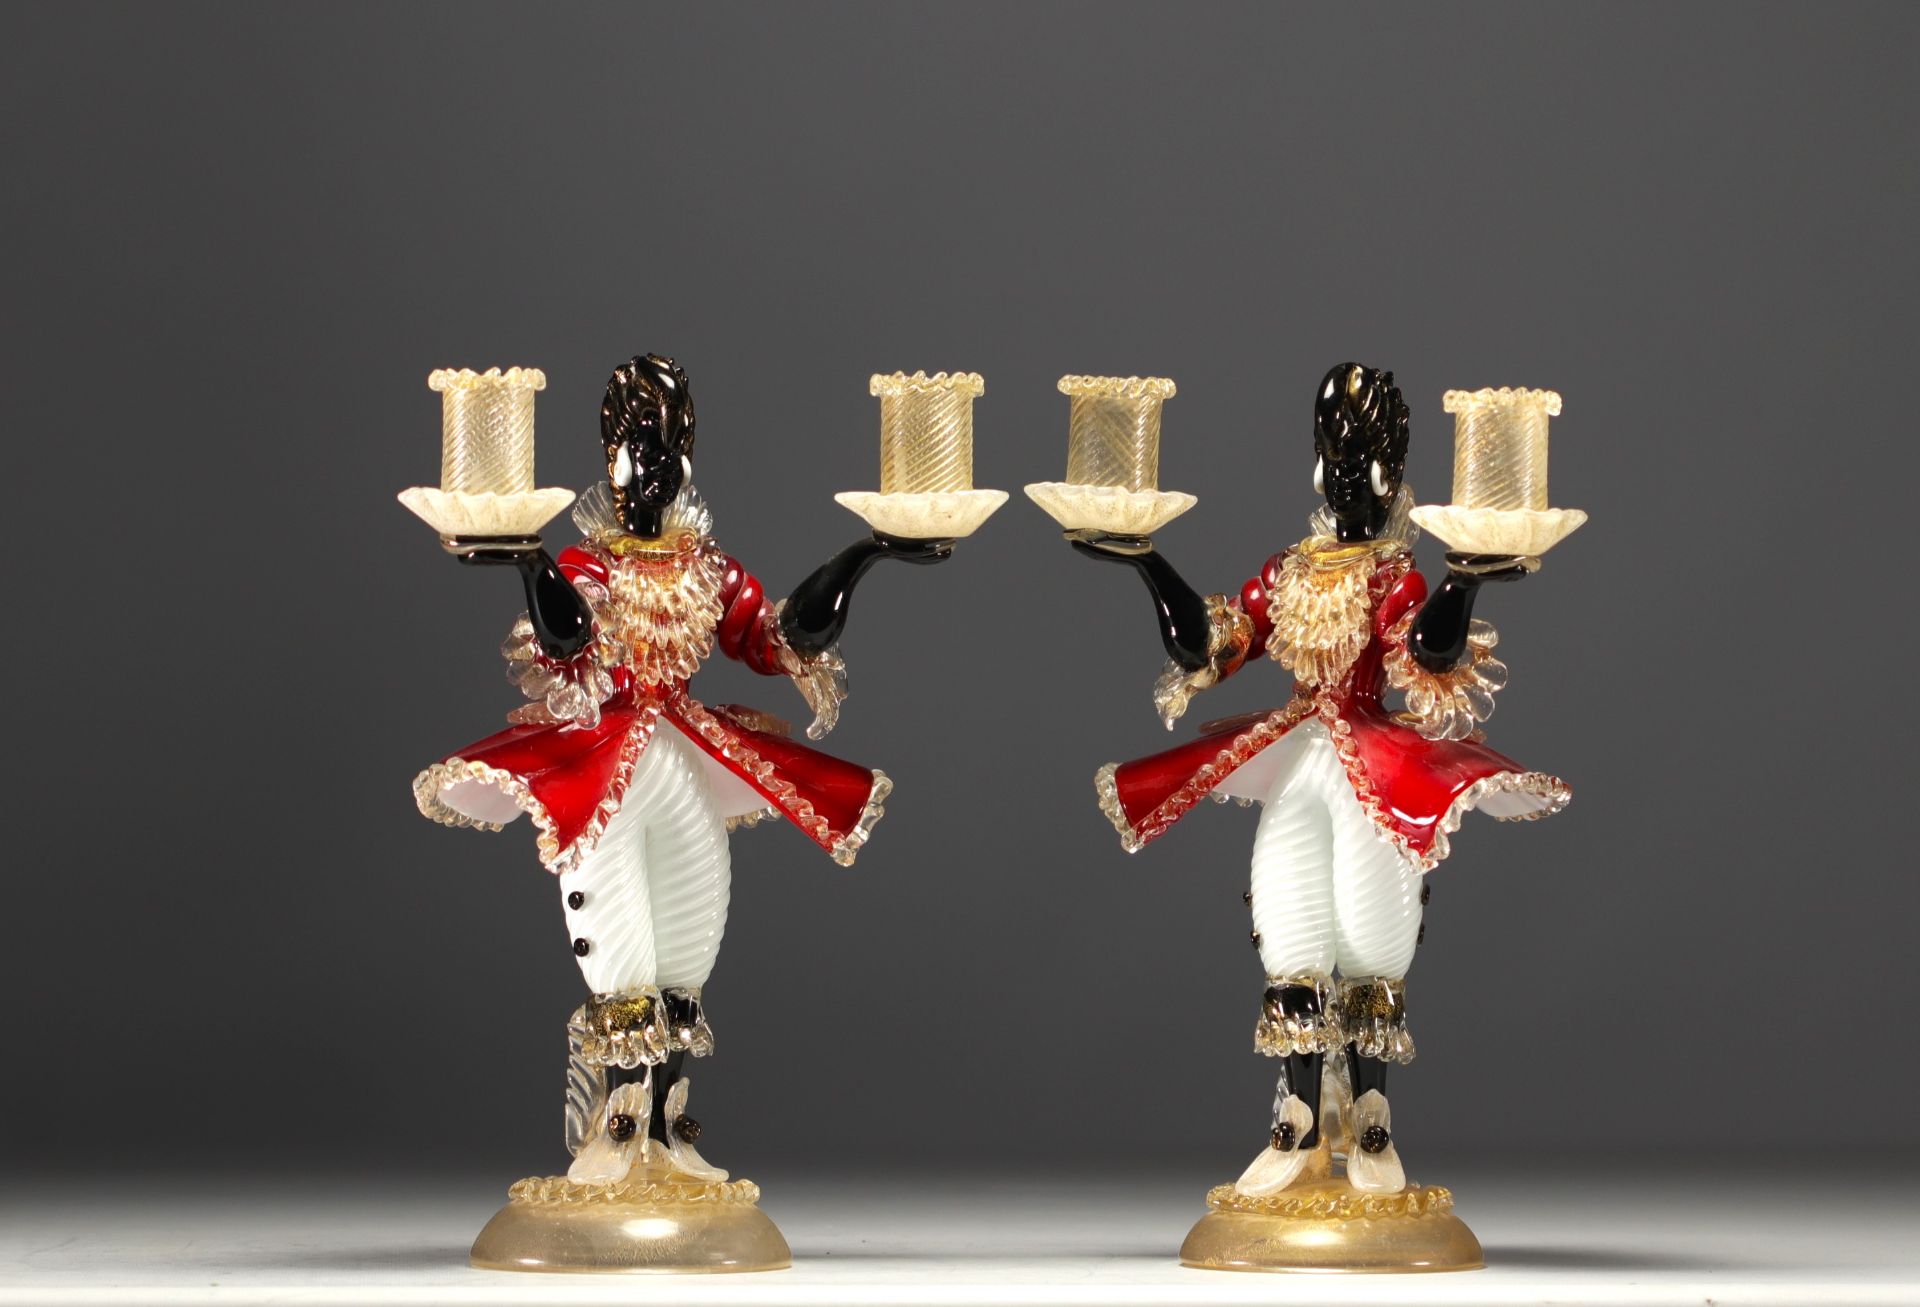 Murano - Pair of candelabra with figures, circa 1920. - Image 2 of 2